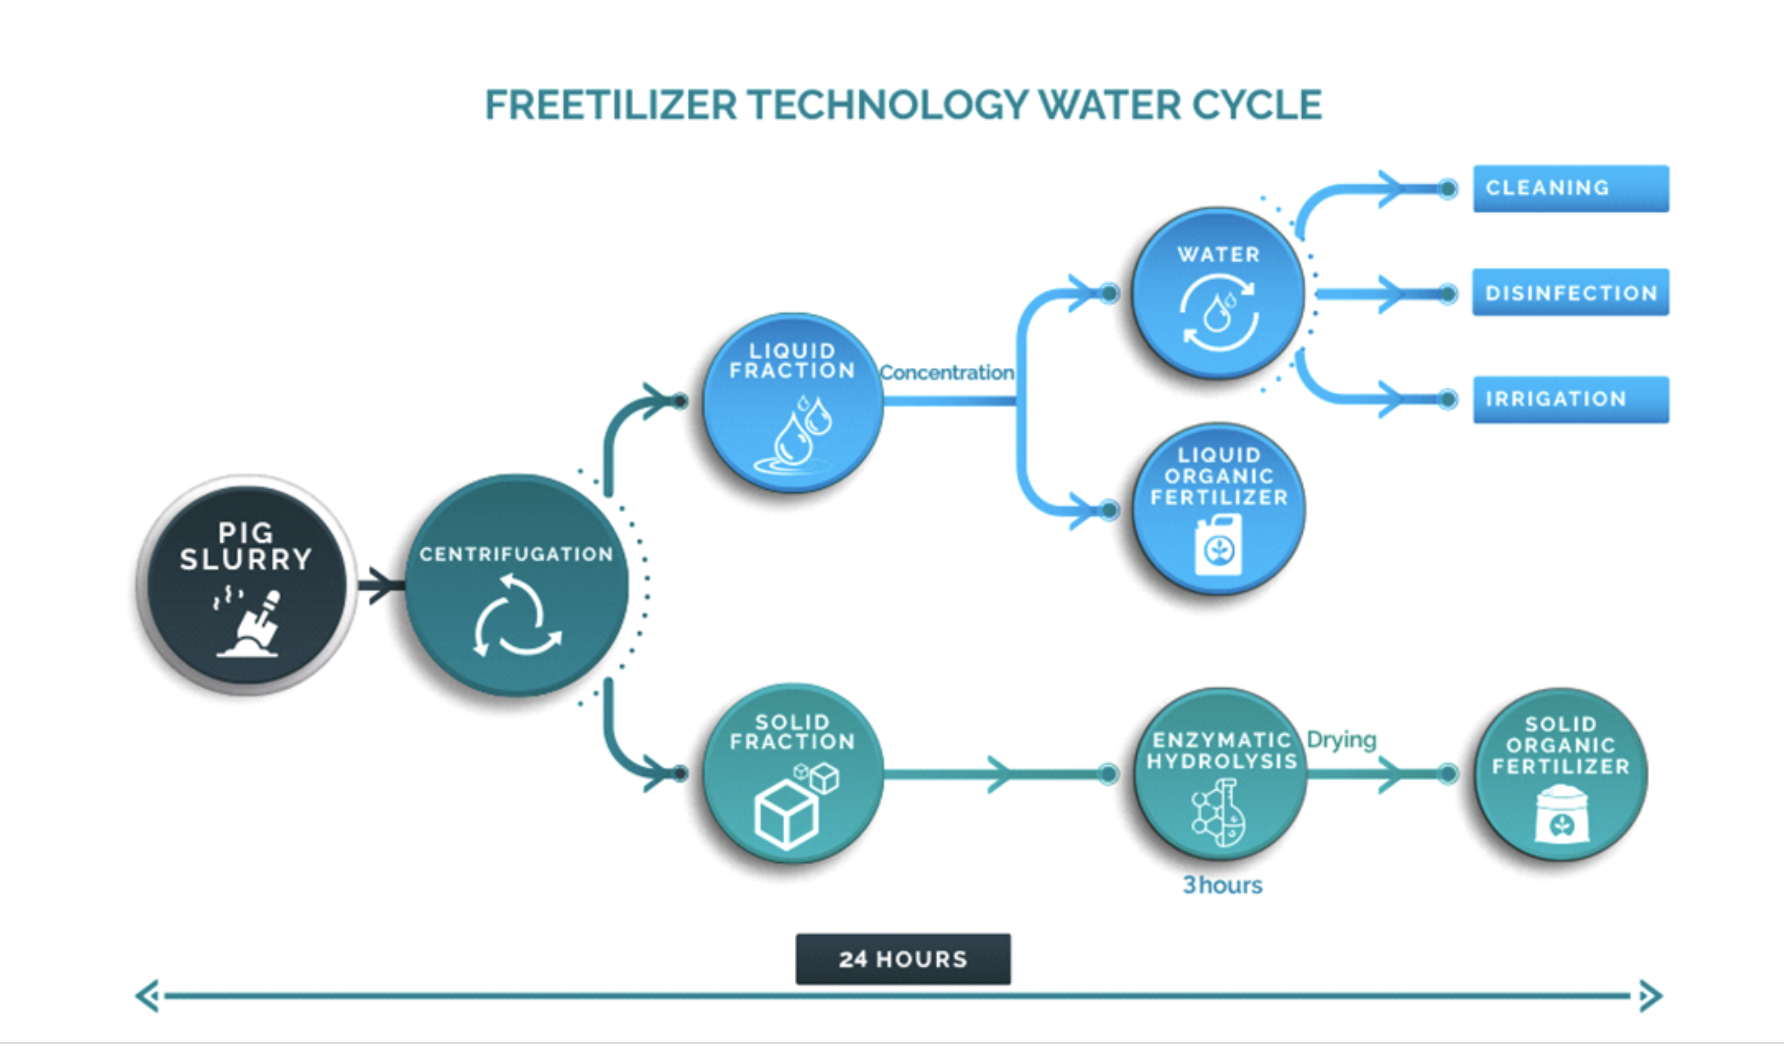 Eco-friendly practices: water recycling from organic manureMaking wastewater reuse a realityAn increasing population, changes in consumption hab...